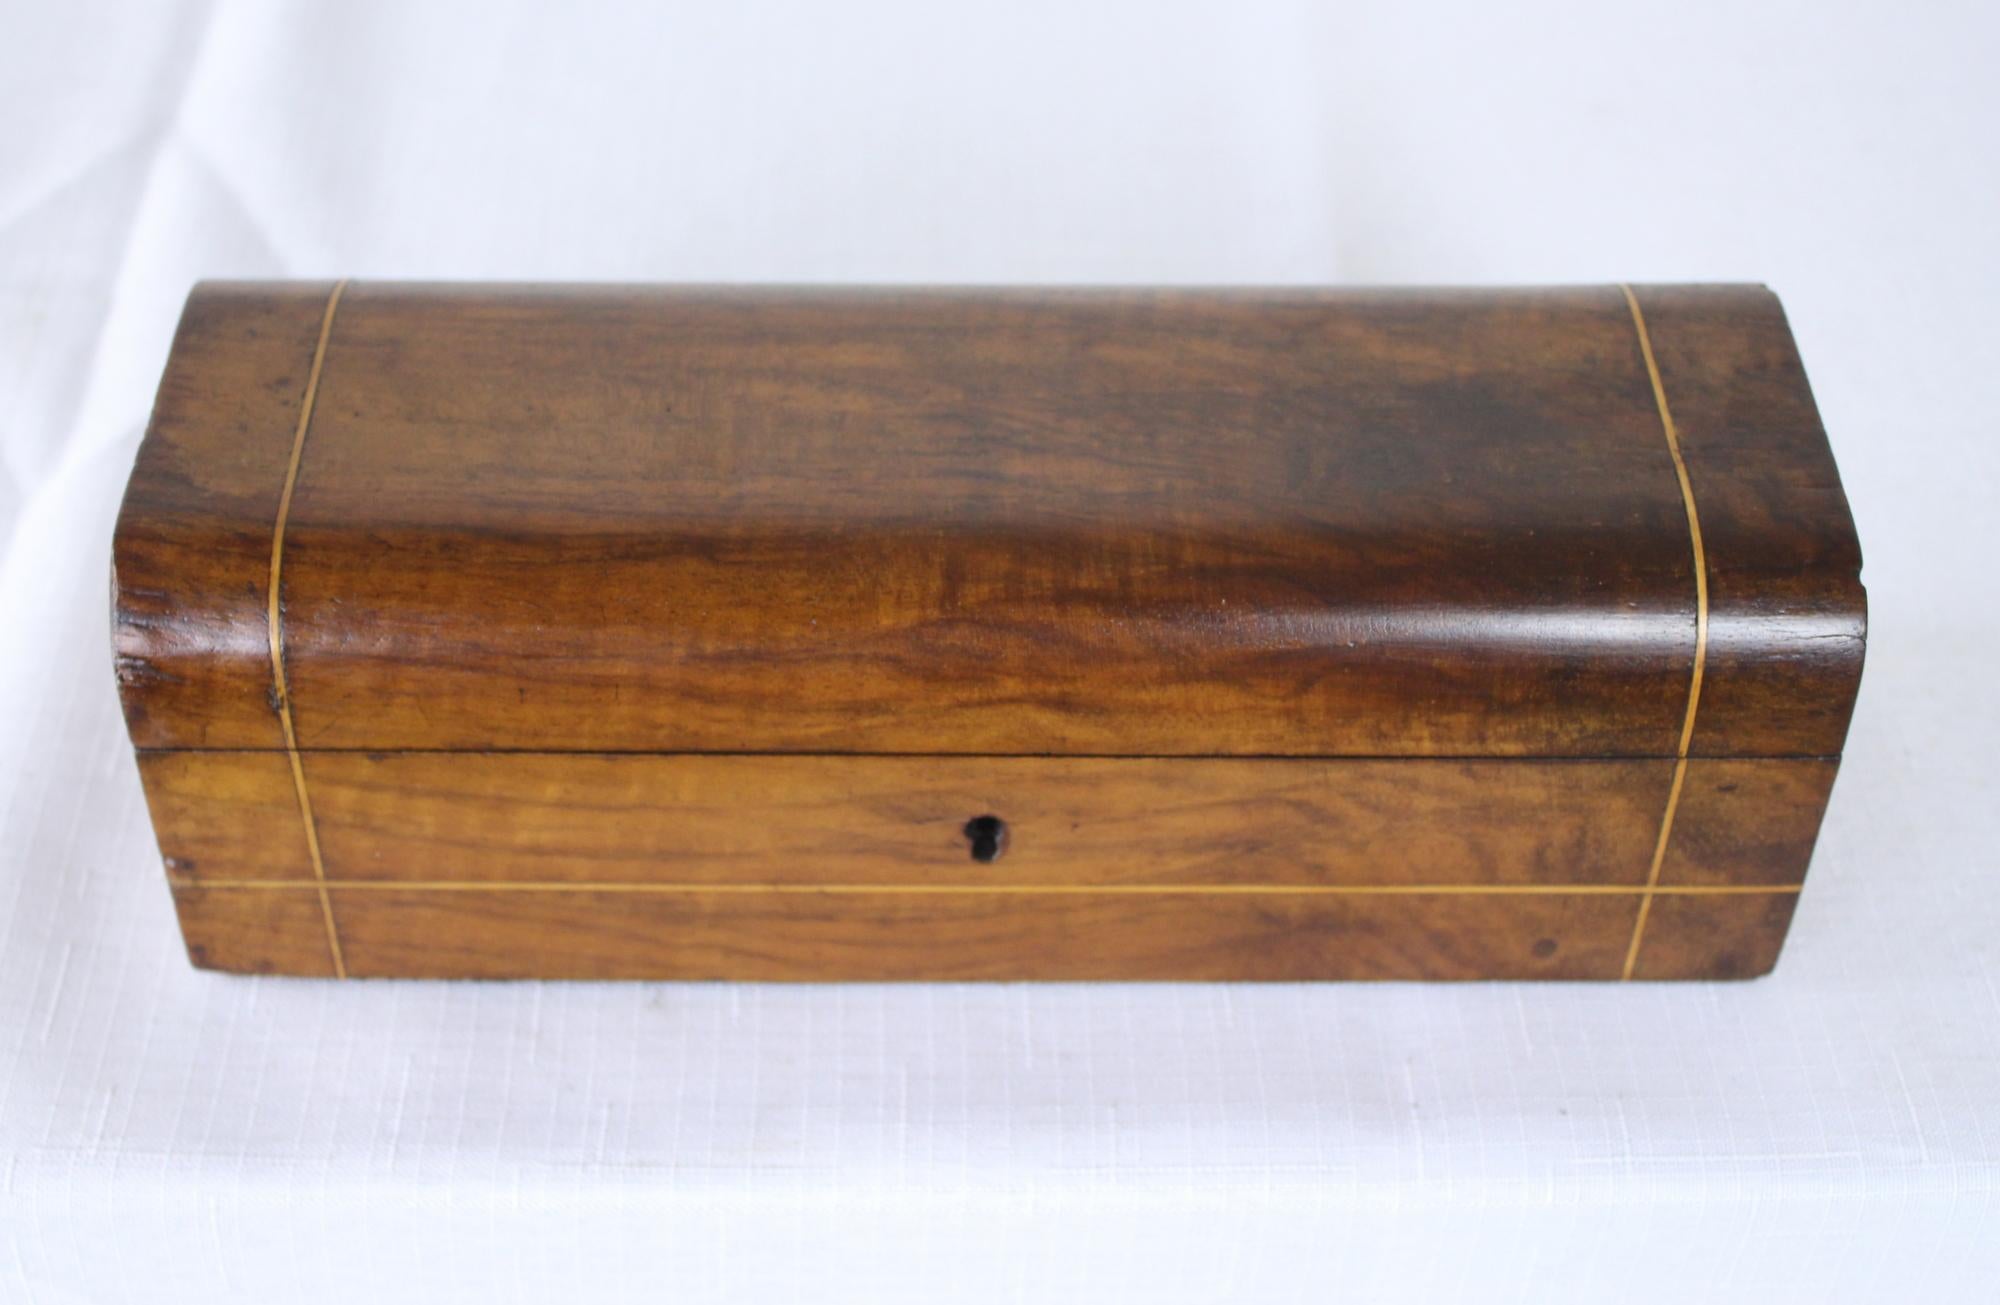 A sleek antique English walnut pencil box with good grain and a lovely soft patina.